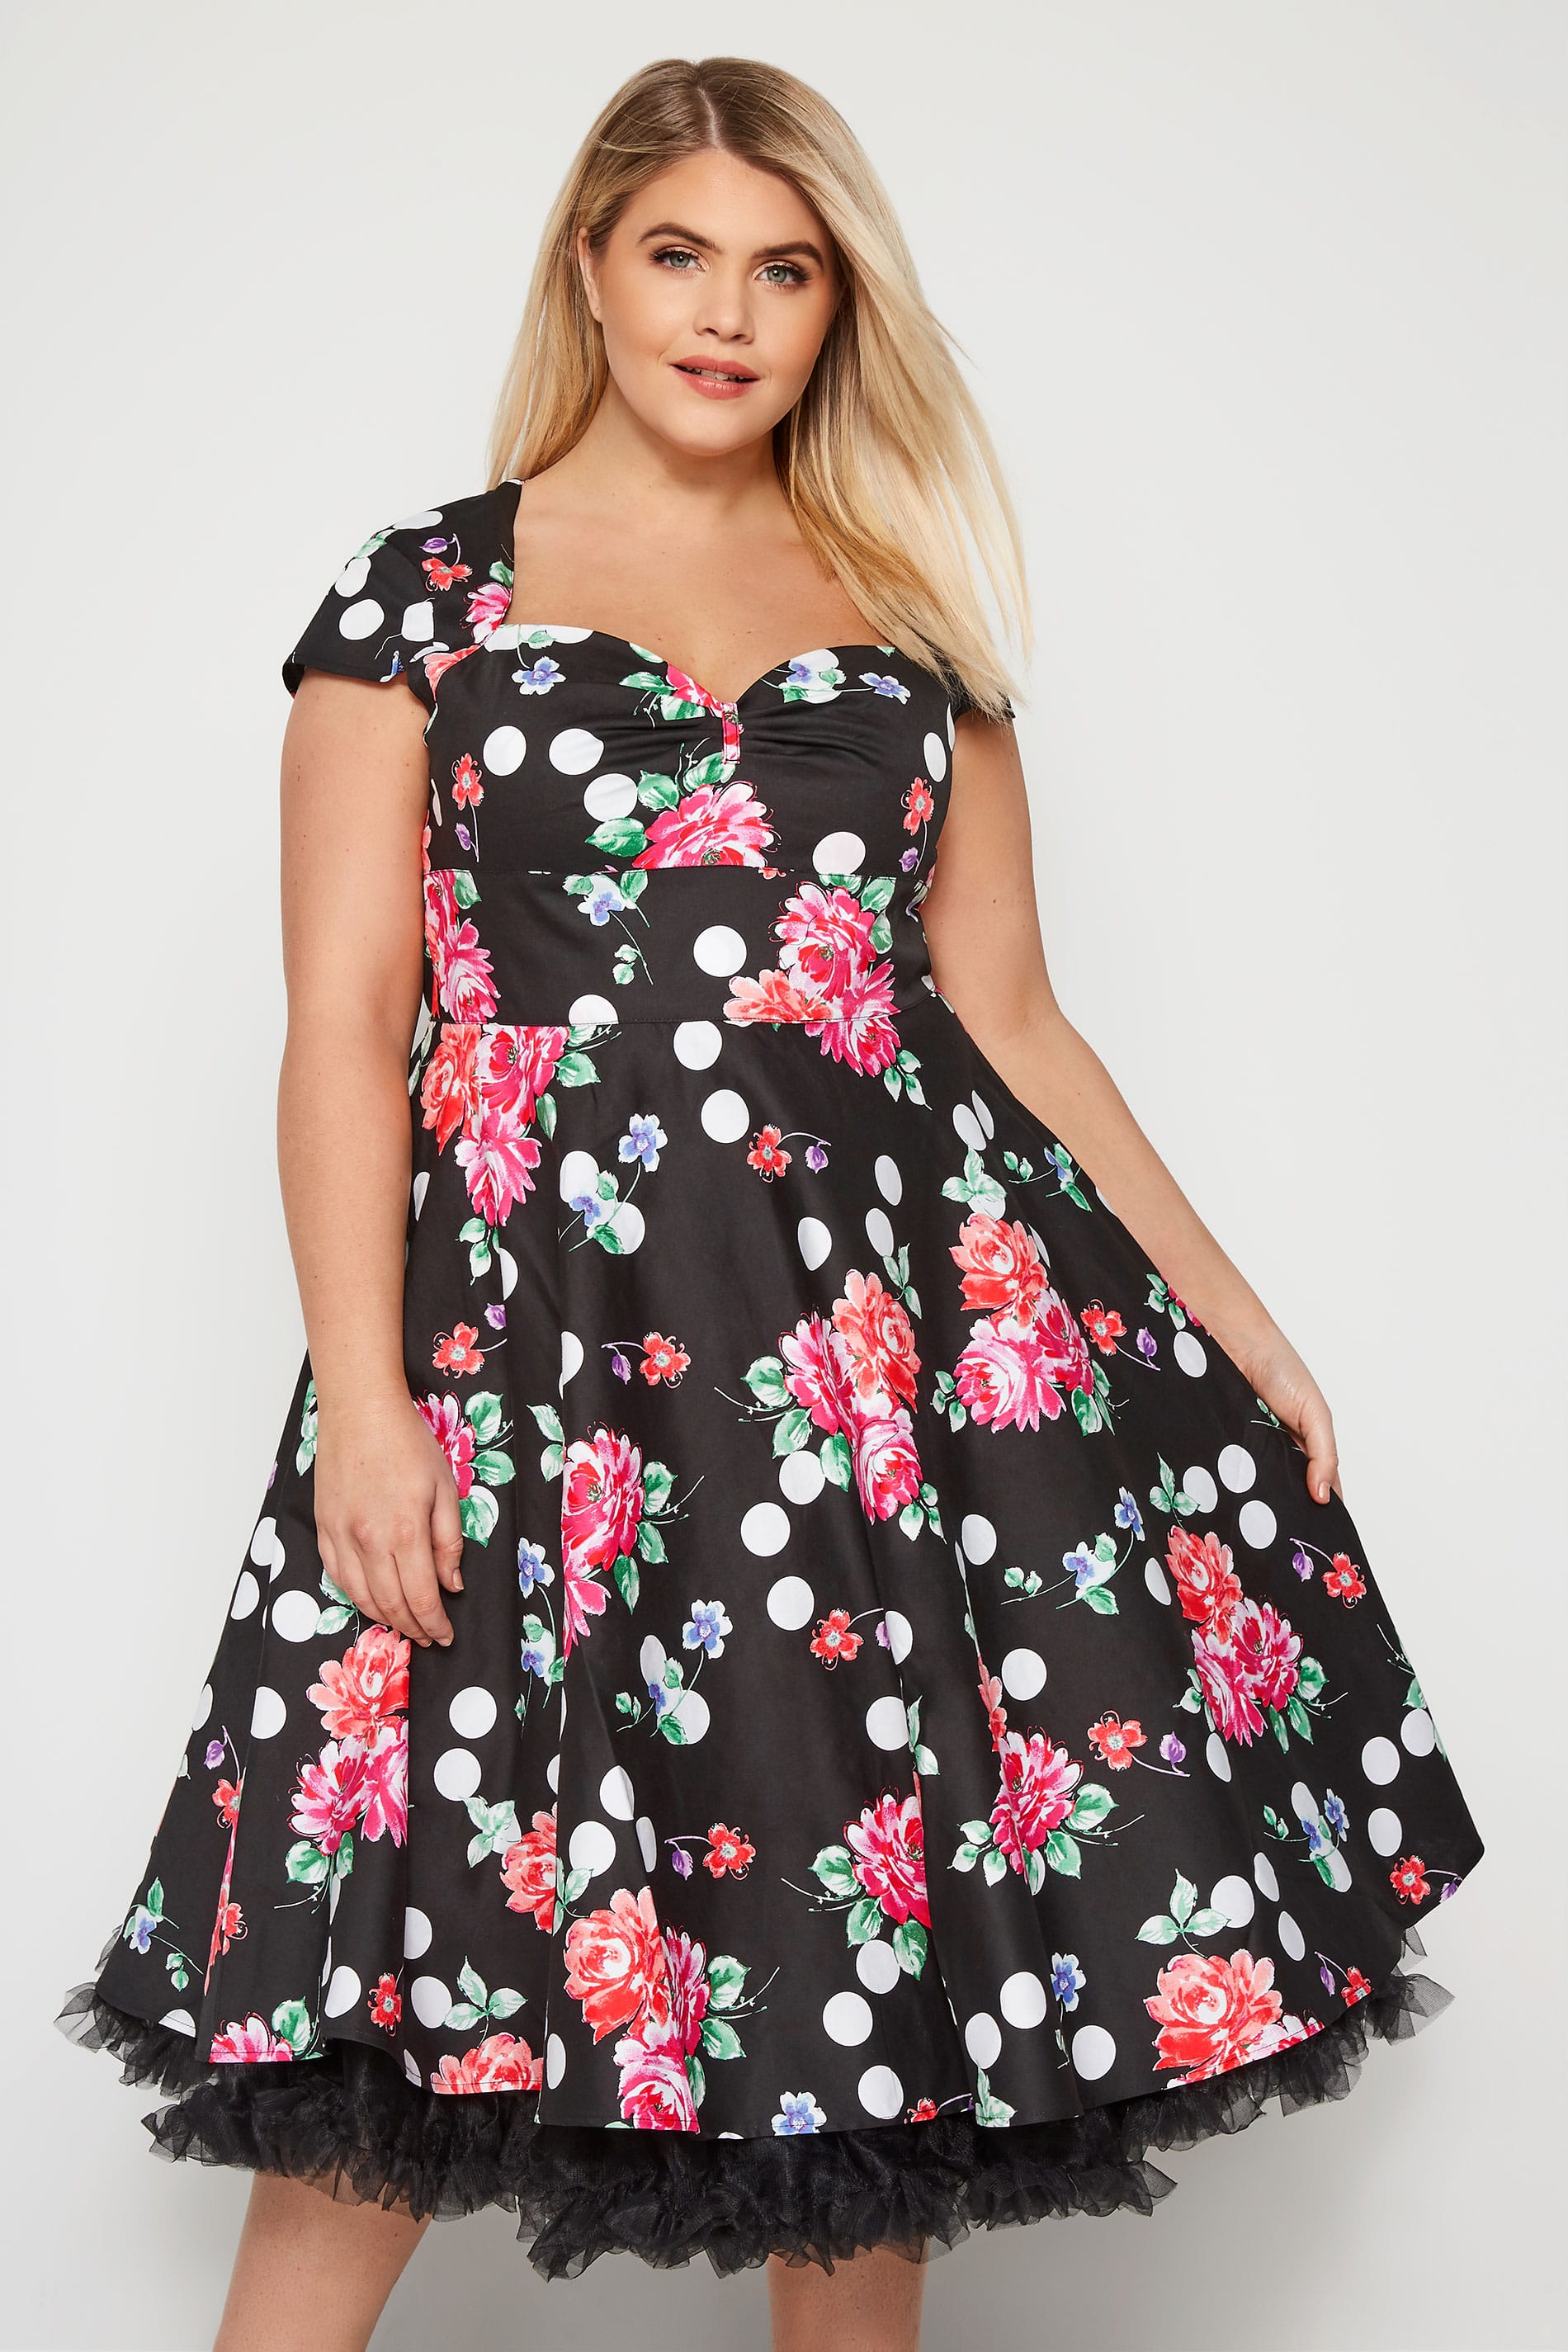 Plus Size HELL BUNNY Black Floral & Spot Carole Dress | Sizes 16 to 32 ...